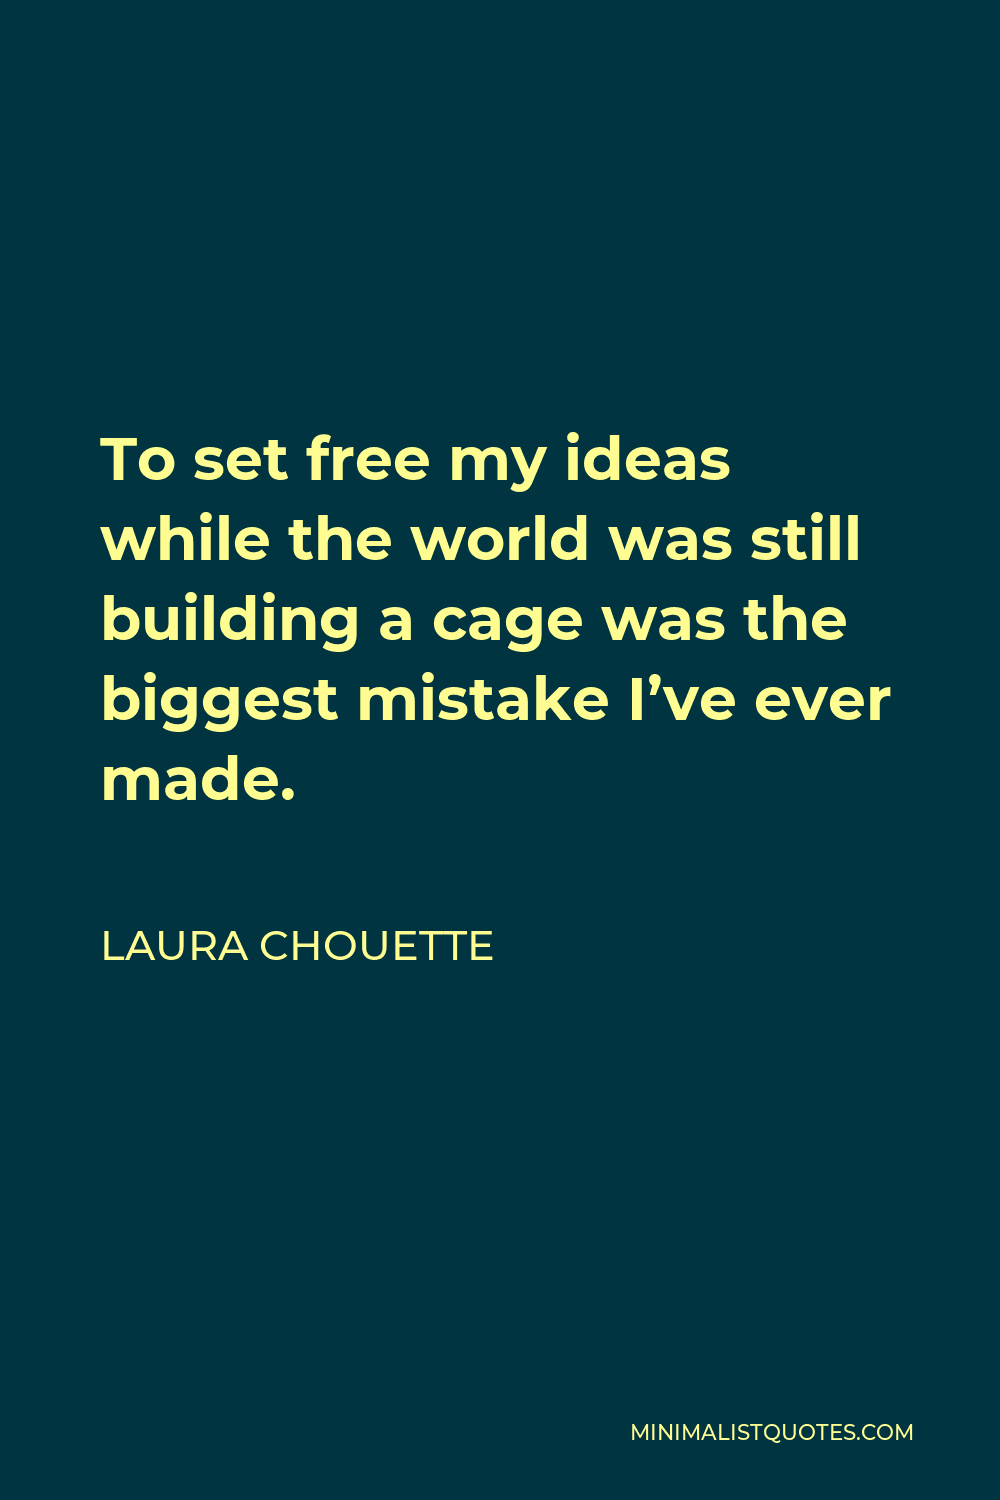 Laura Chouette Quote - To set free my ideas while the world was still building a cage was the biggest mistake I’ve ever made.